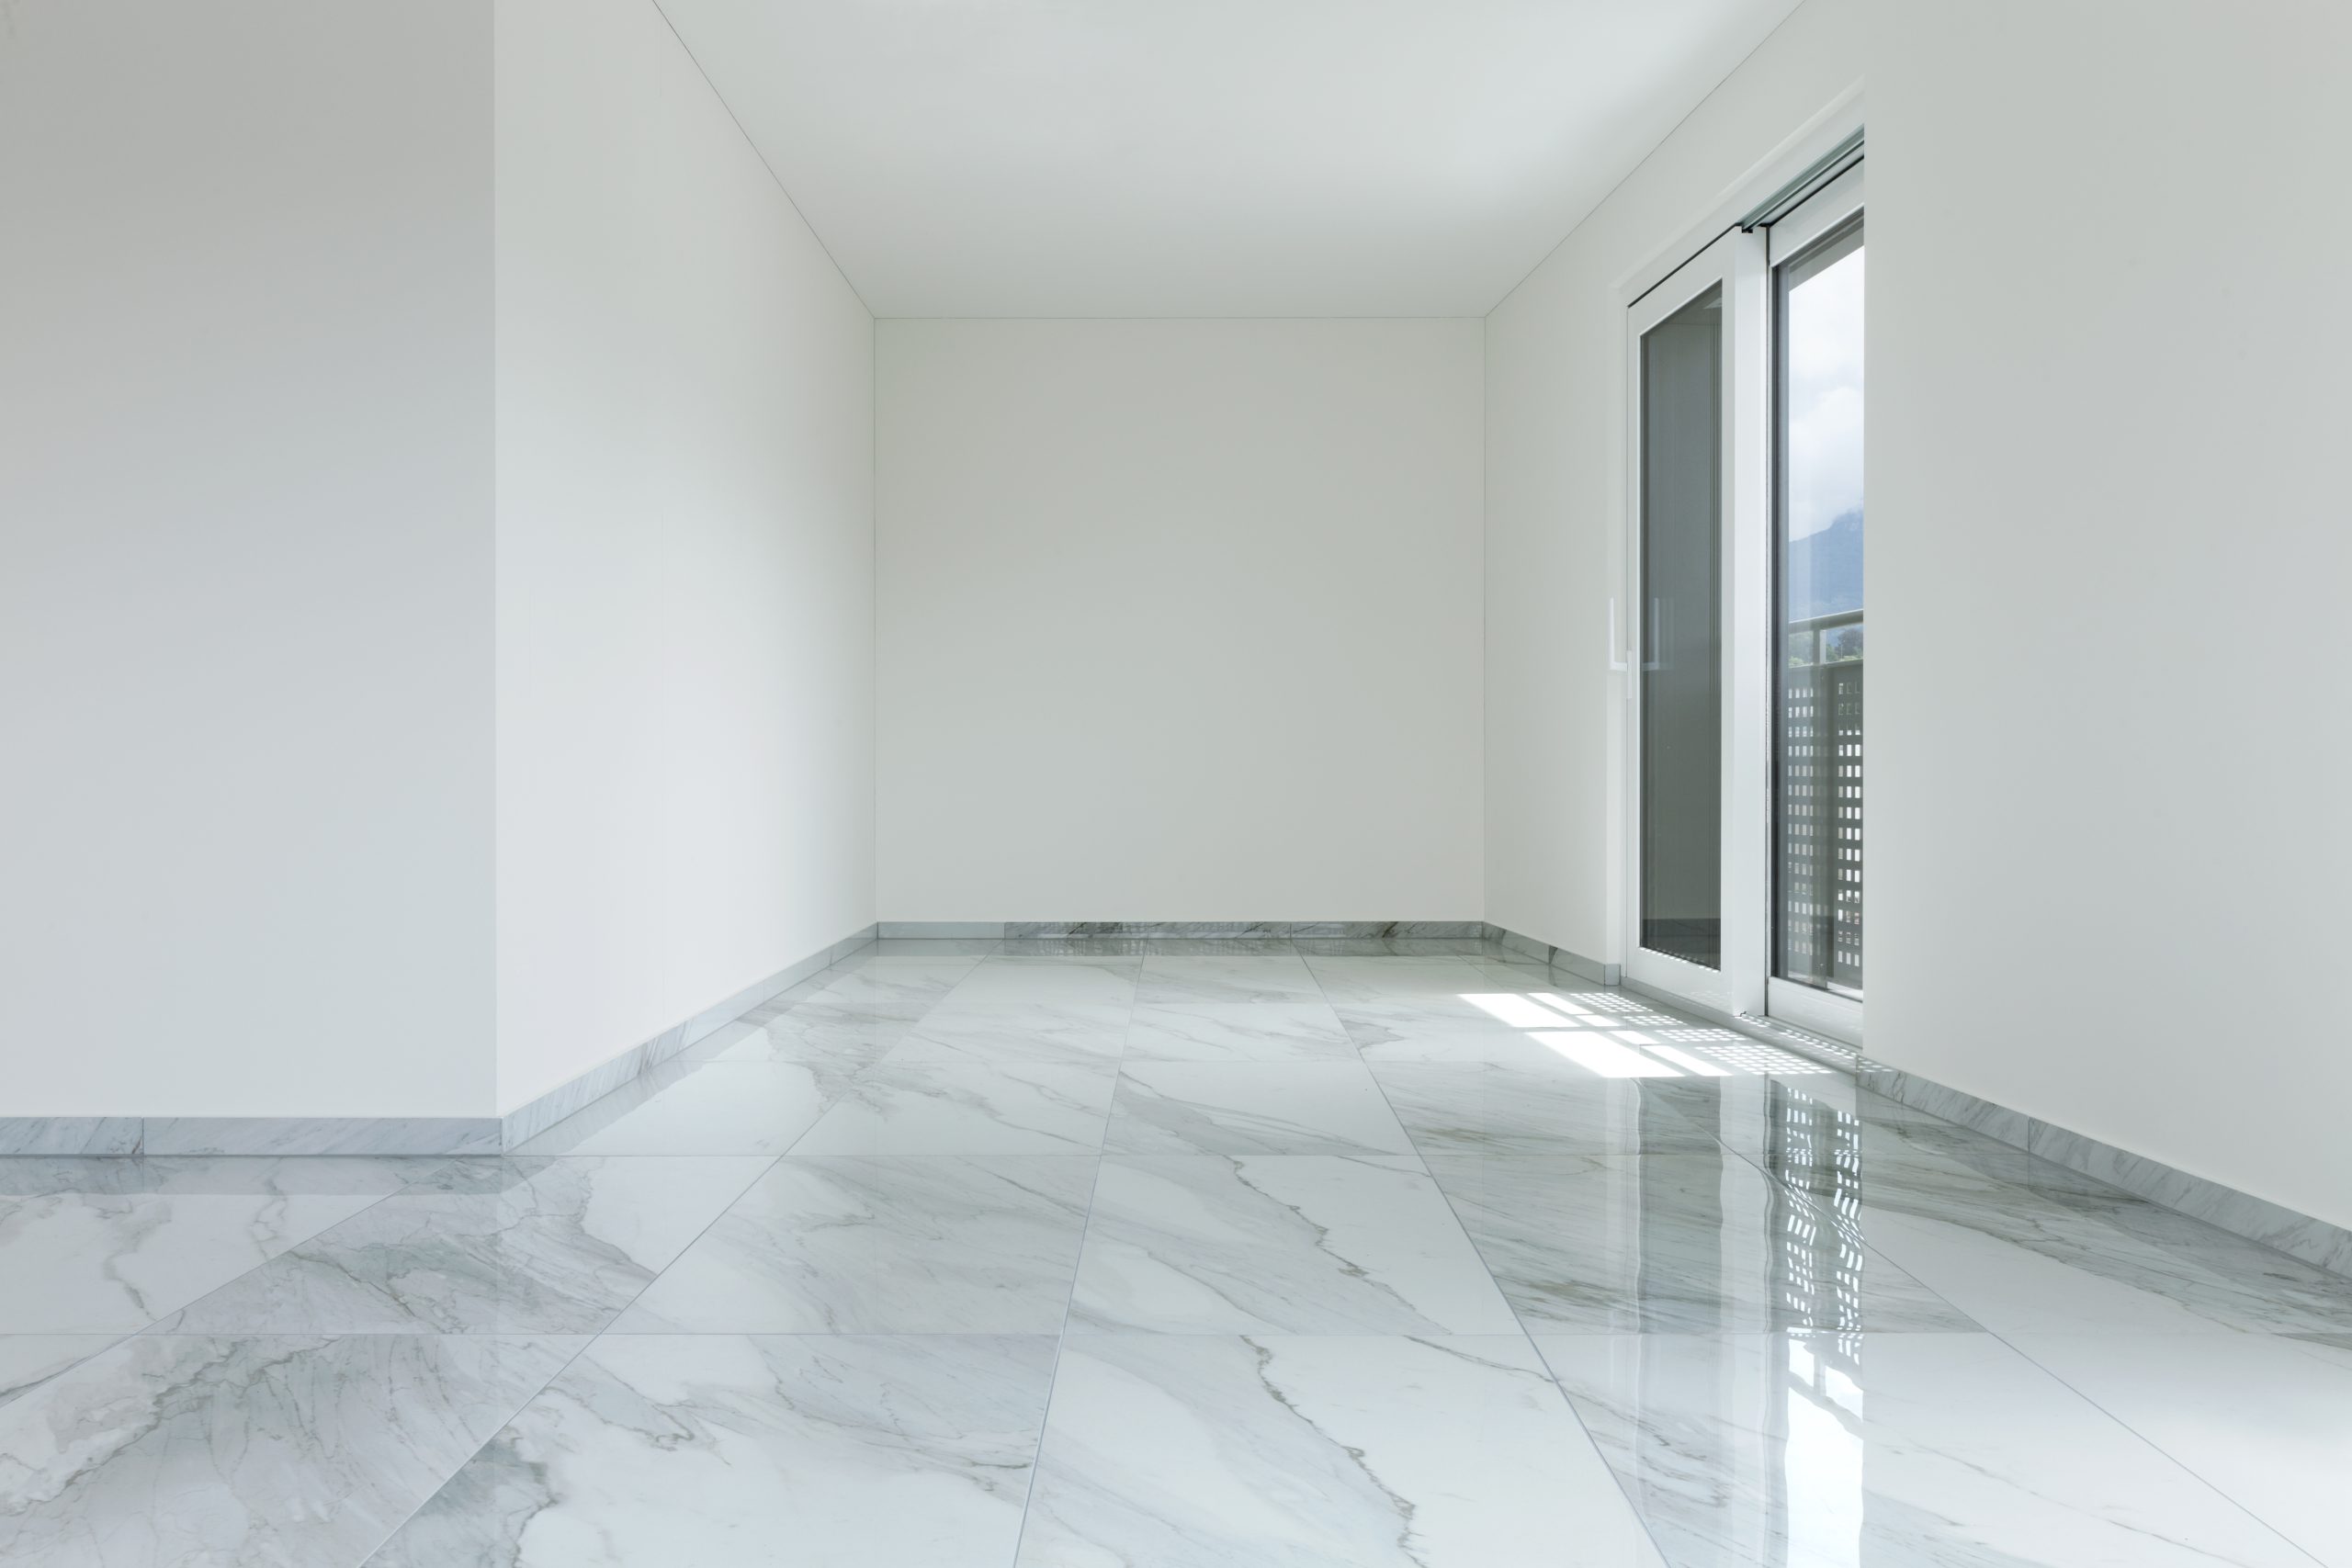 Interior of empty apartment, wide room with marble floor